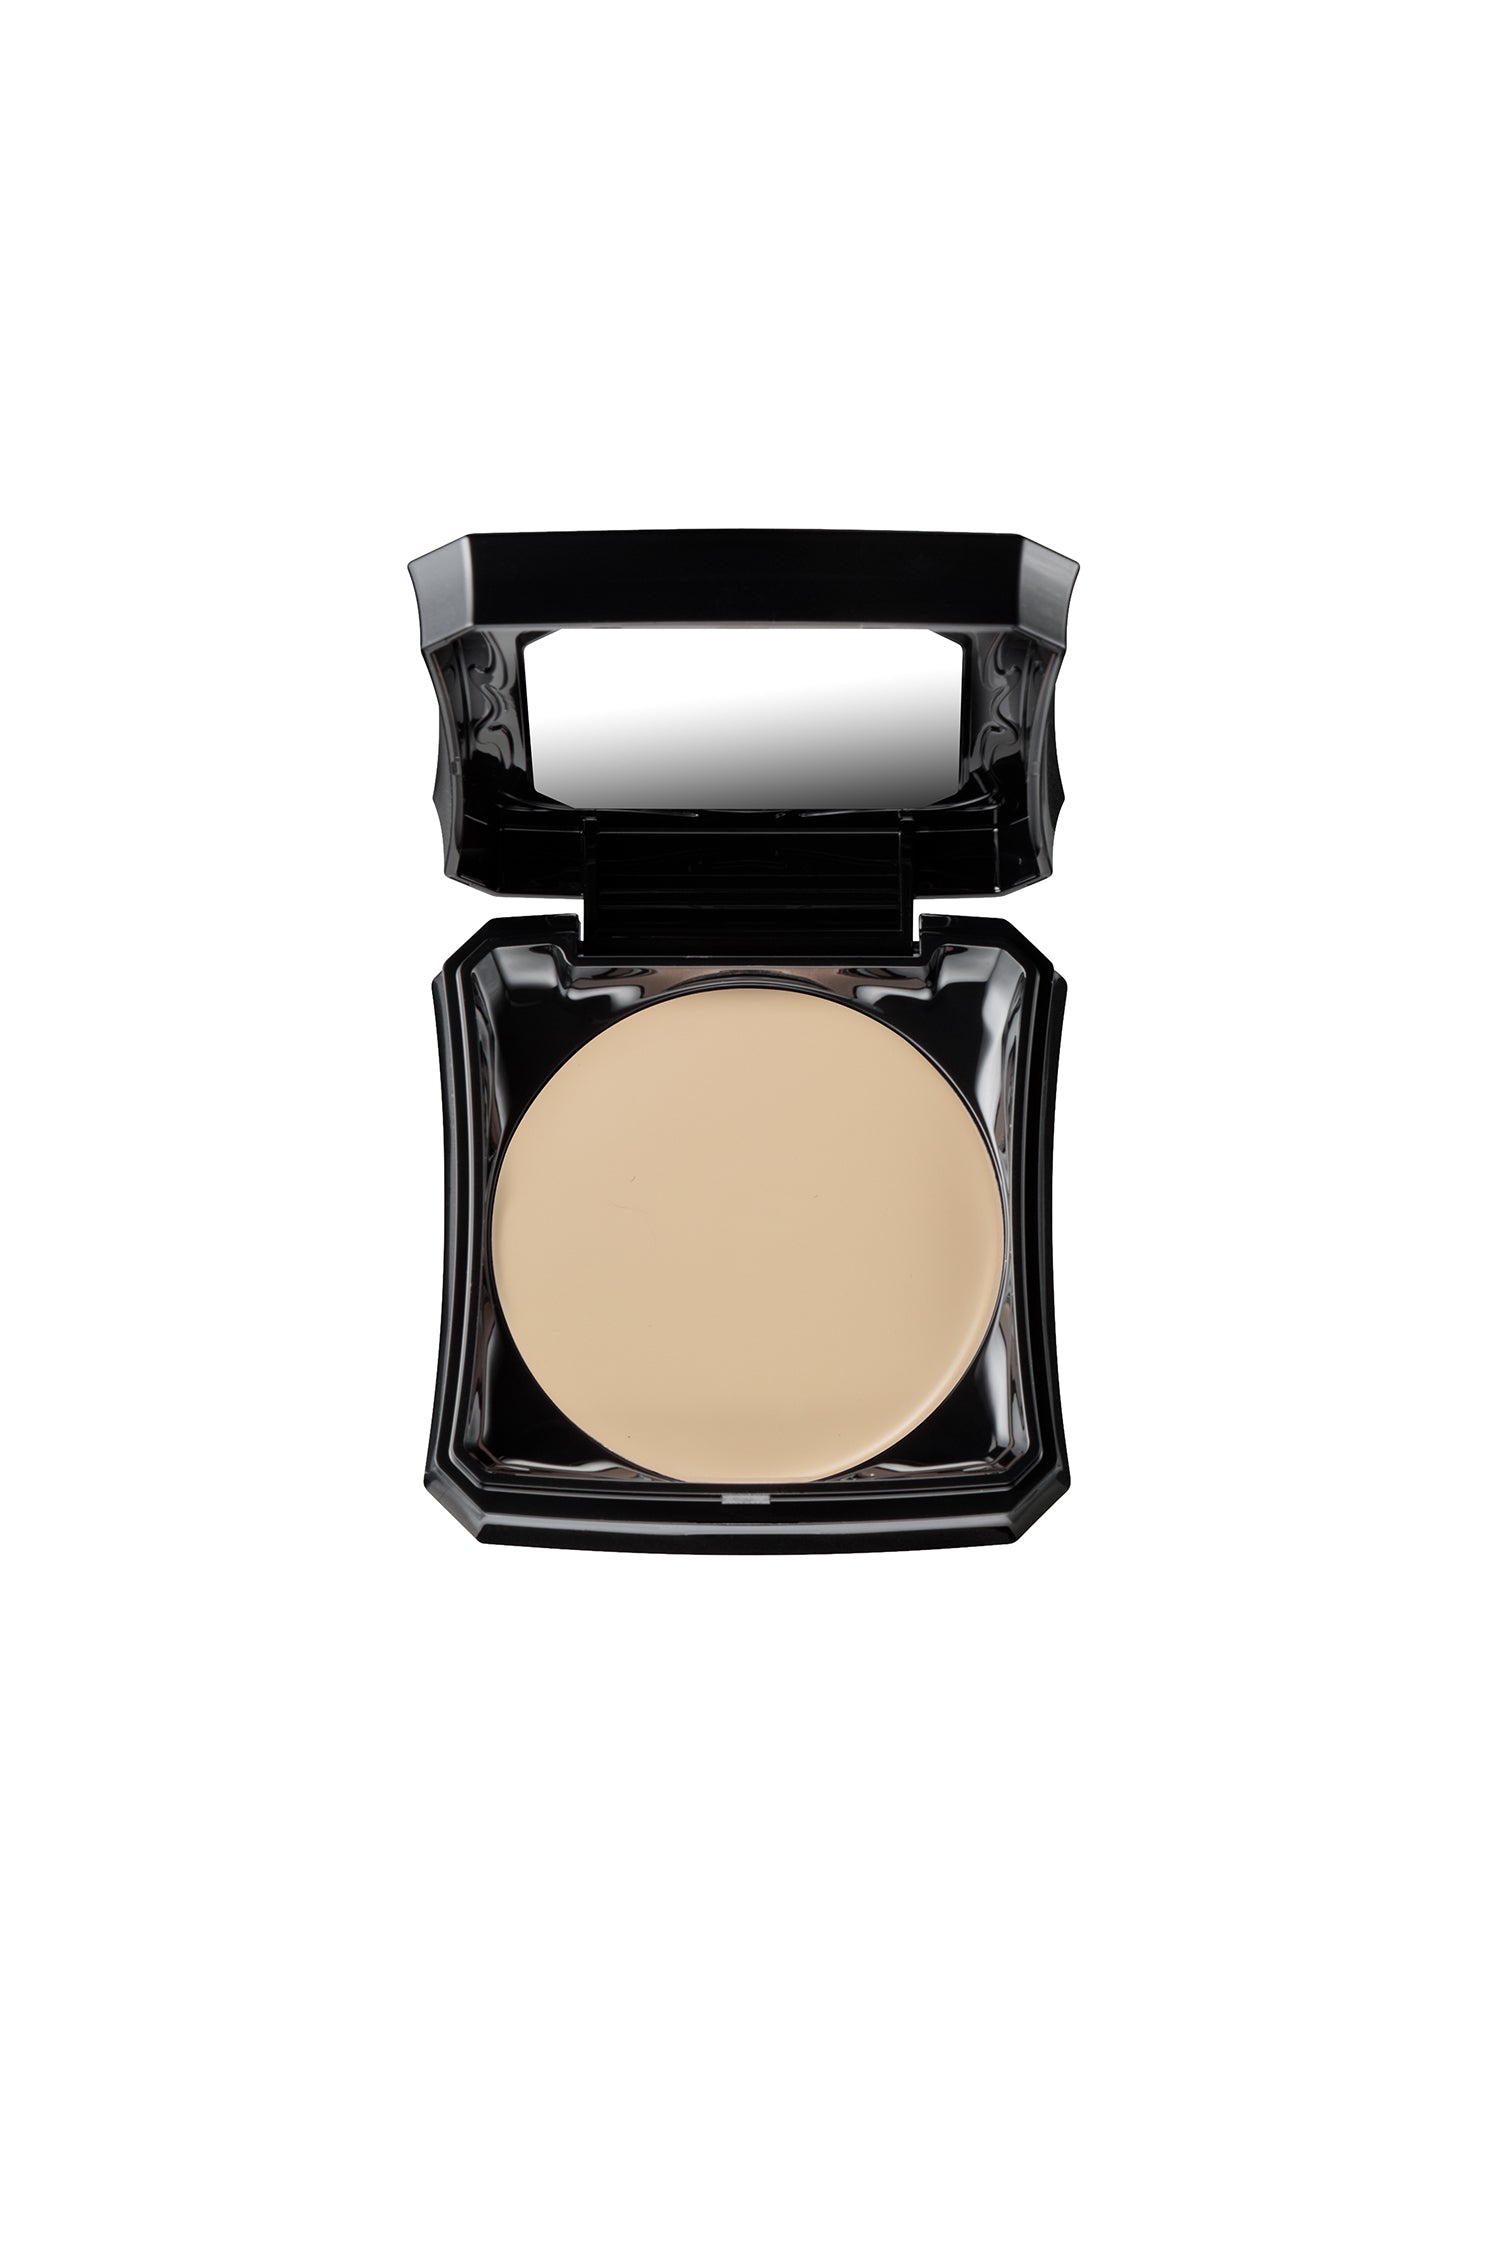 Anna Sui FAIR foundation is in a black squared container with powders and mirror